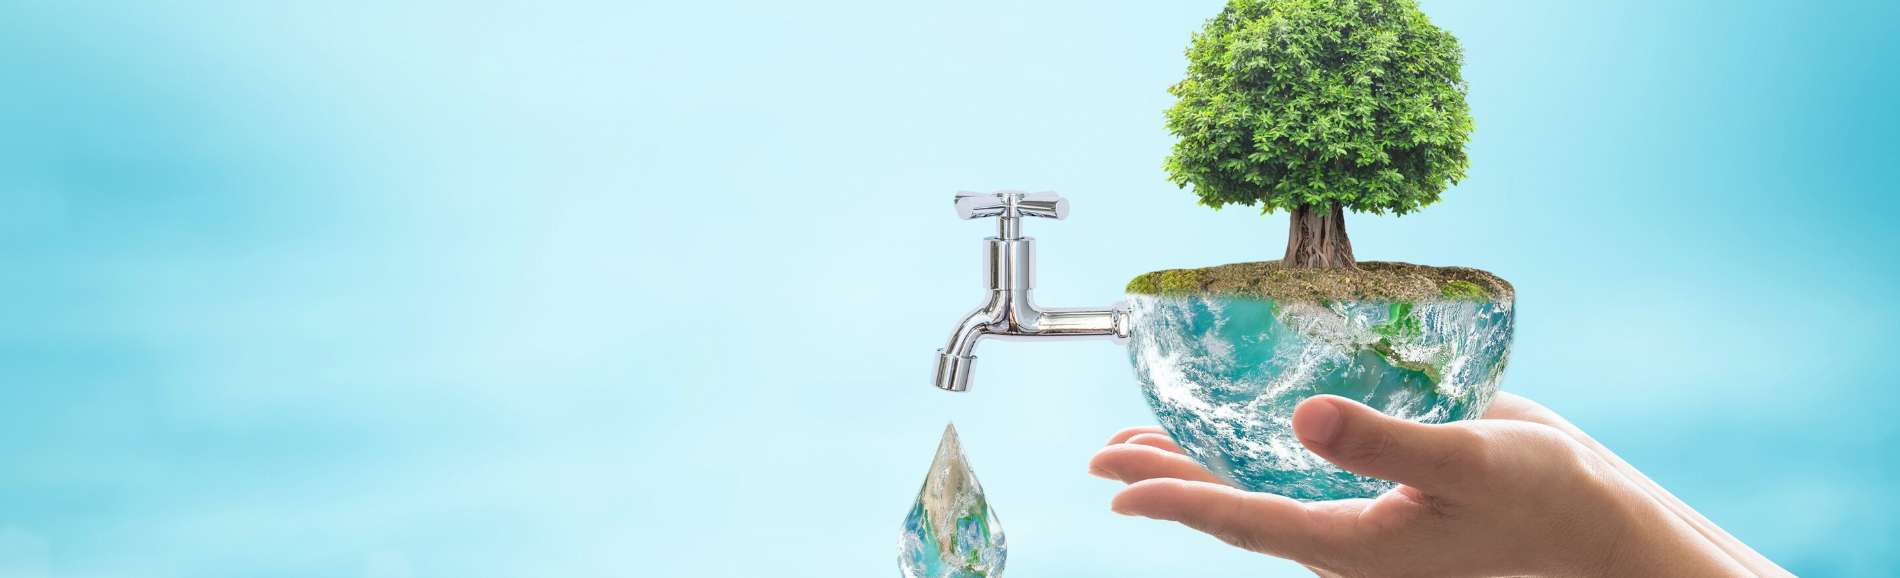 image of tree in a bowl of water with a tap attached